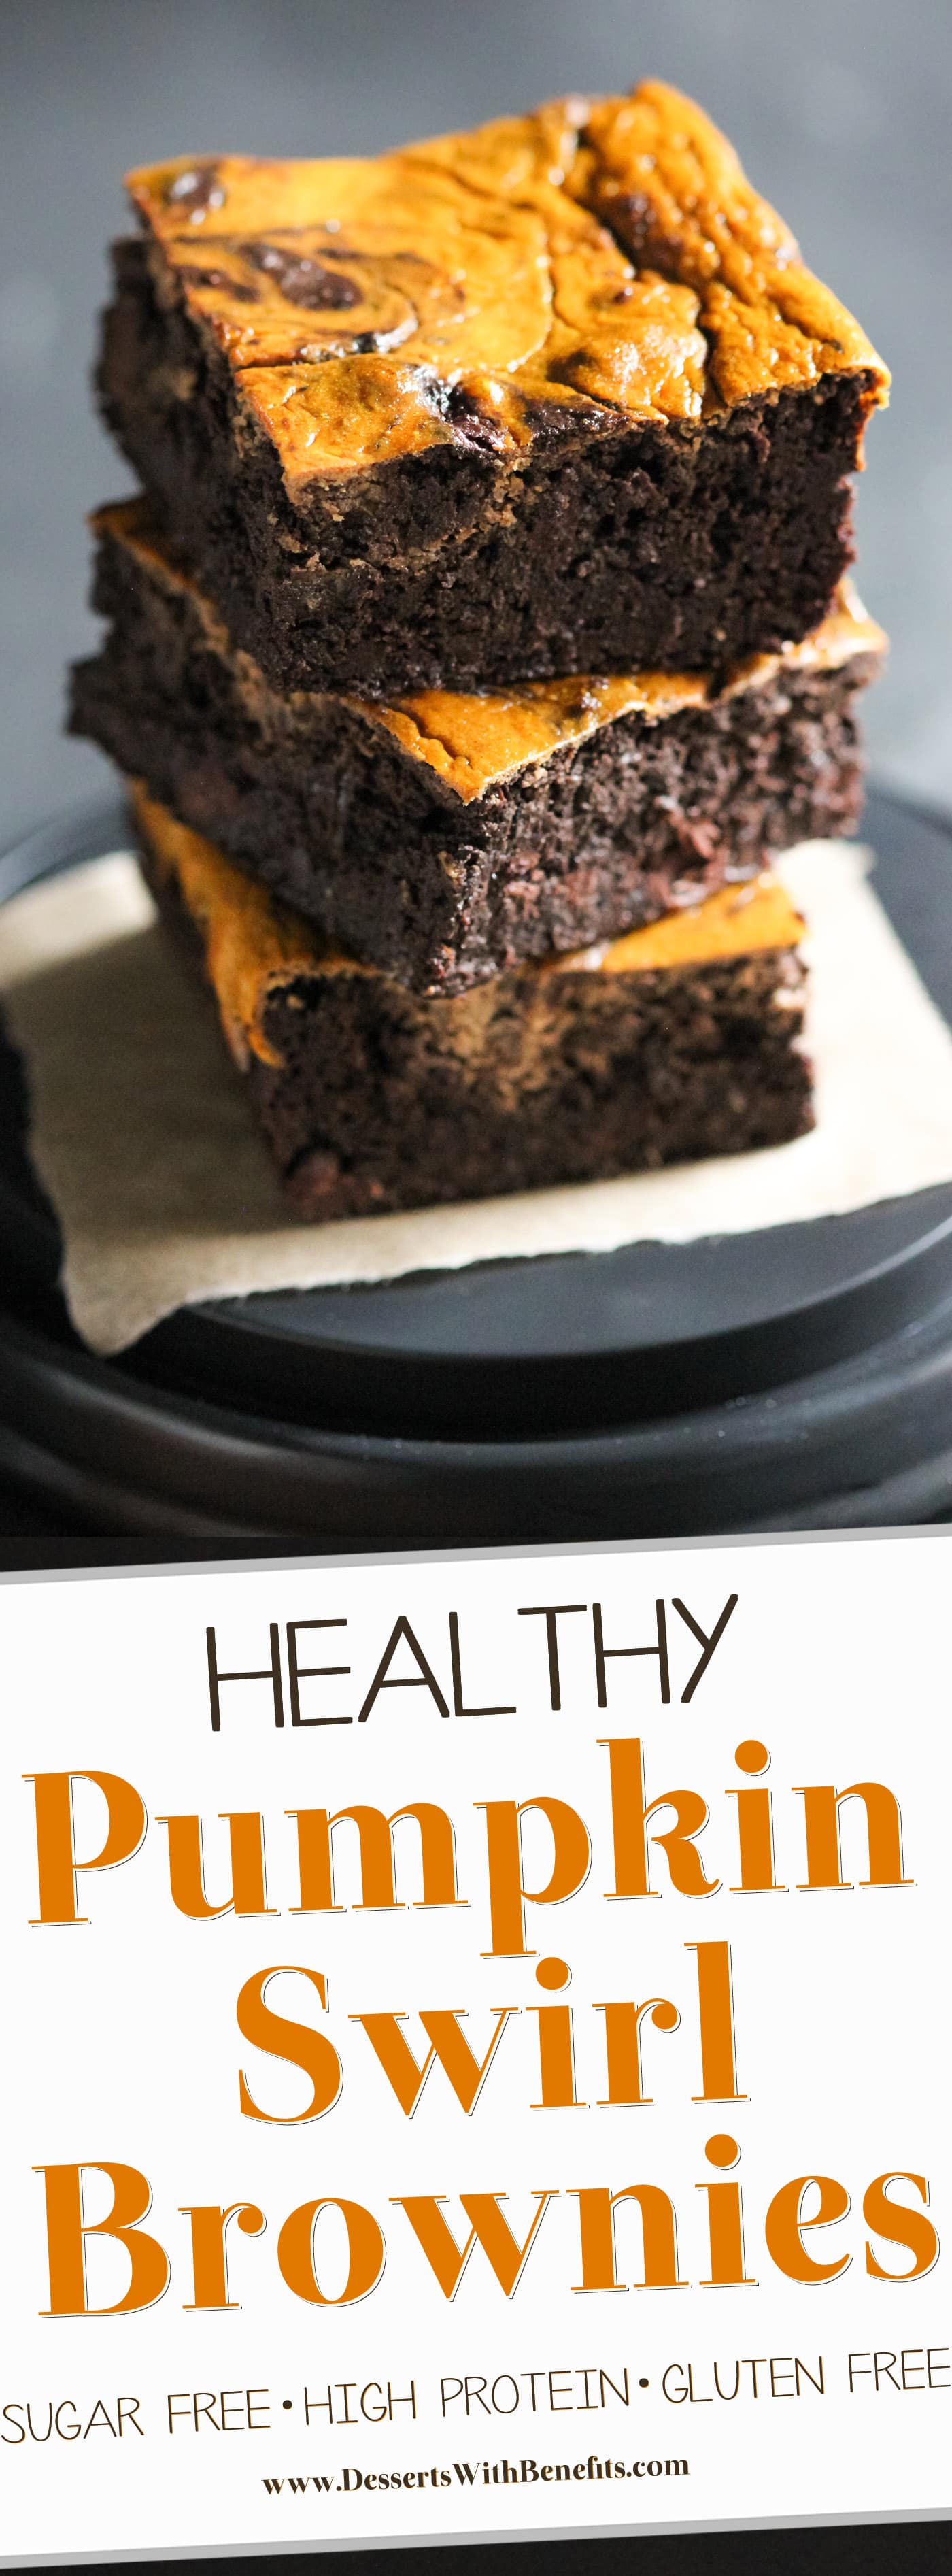 These Healthy Pumpkin Swirl Brownies are comprised of an UBER fudgy brownie base studded with chocolate chips, and are topped with a rich, cinnamon-spiced, pumpkin cream cheese swirl. These brownies are delicious, addictive, and secretly good for you too. You'd never guess these are sugar free, high protein, high fiber, and gluten free! Healthy Dessert Recipes at the Desserts With Benefits Blog (www.DessertsWithBenefits.com)